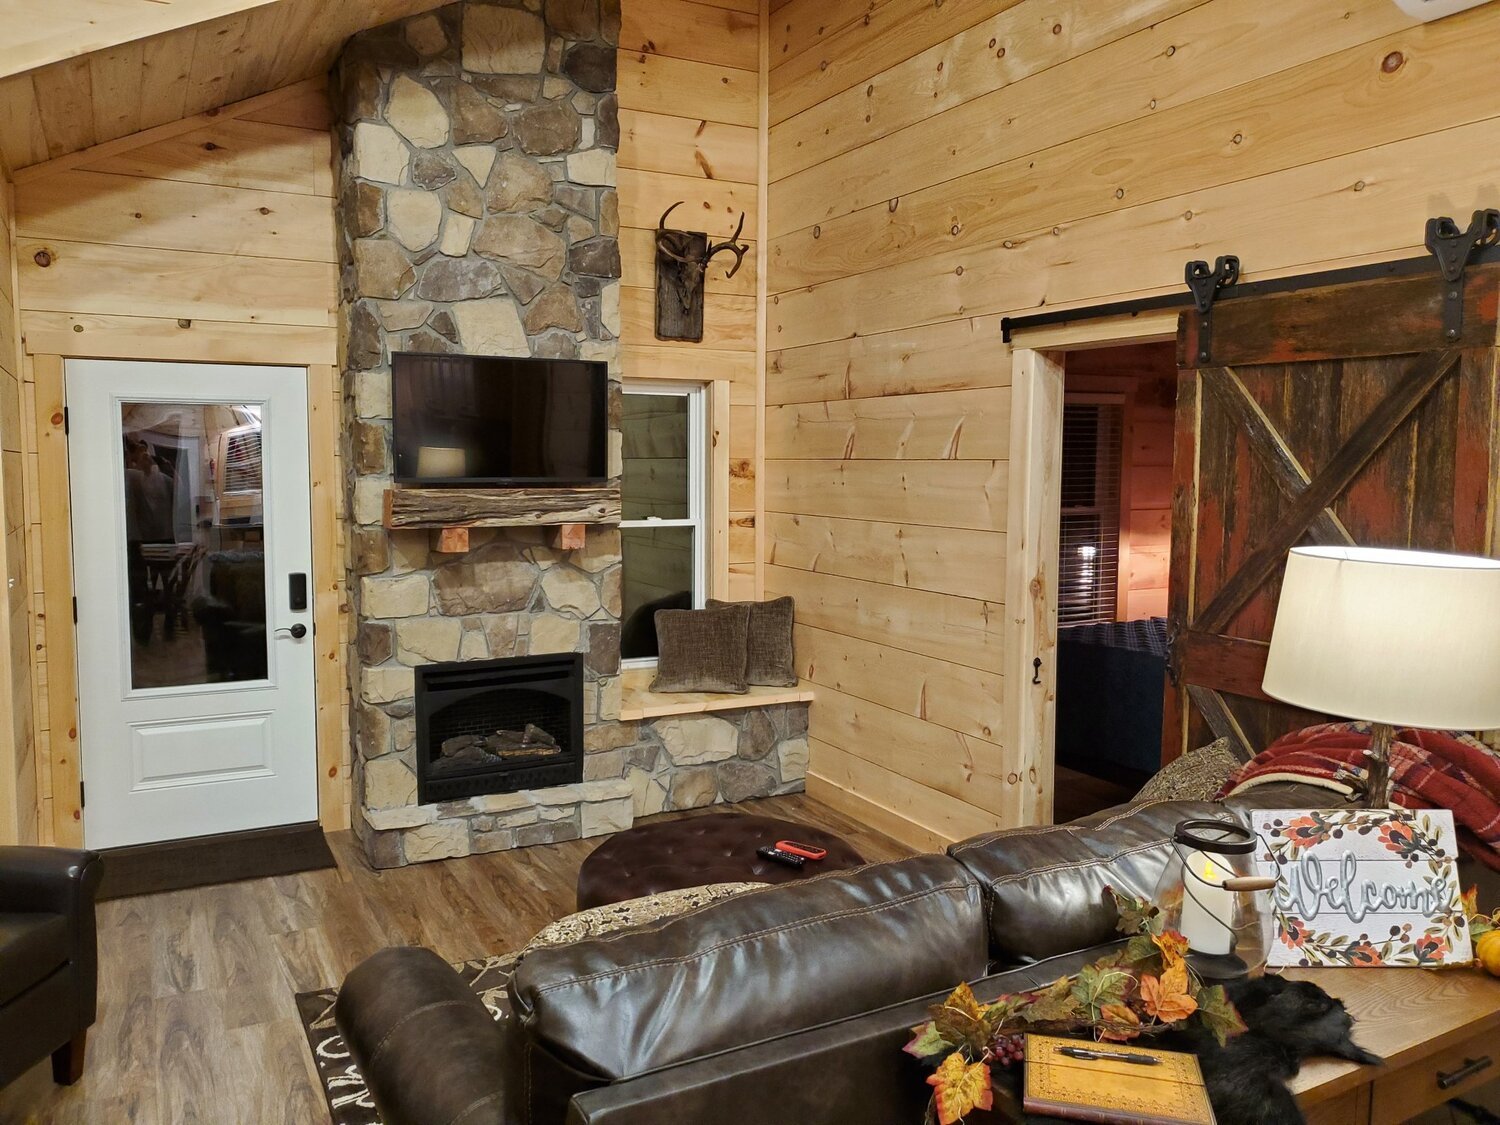  They’ve used live edge slabs, v-groove tongue and groove, shiplap, reclaimed barnwood shiplap, chink log siding, blue stain (aka “beetle kill pine”), and bead board all through their cabins to achieve a wonderfully rustic look! These cabins are burs